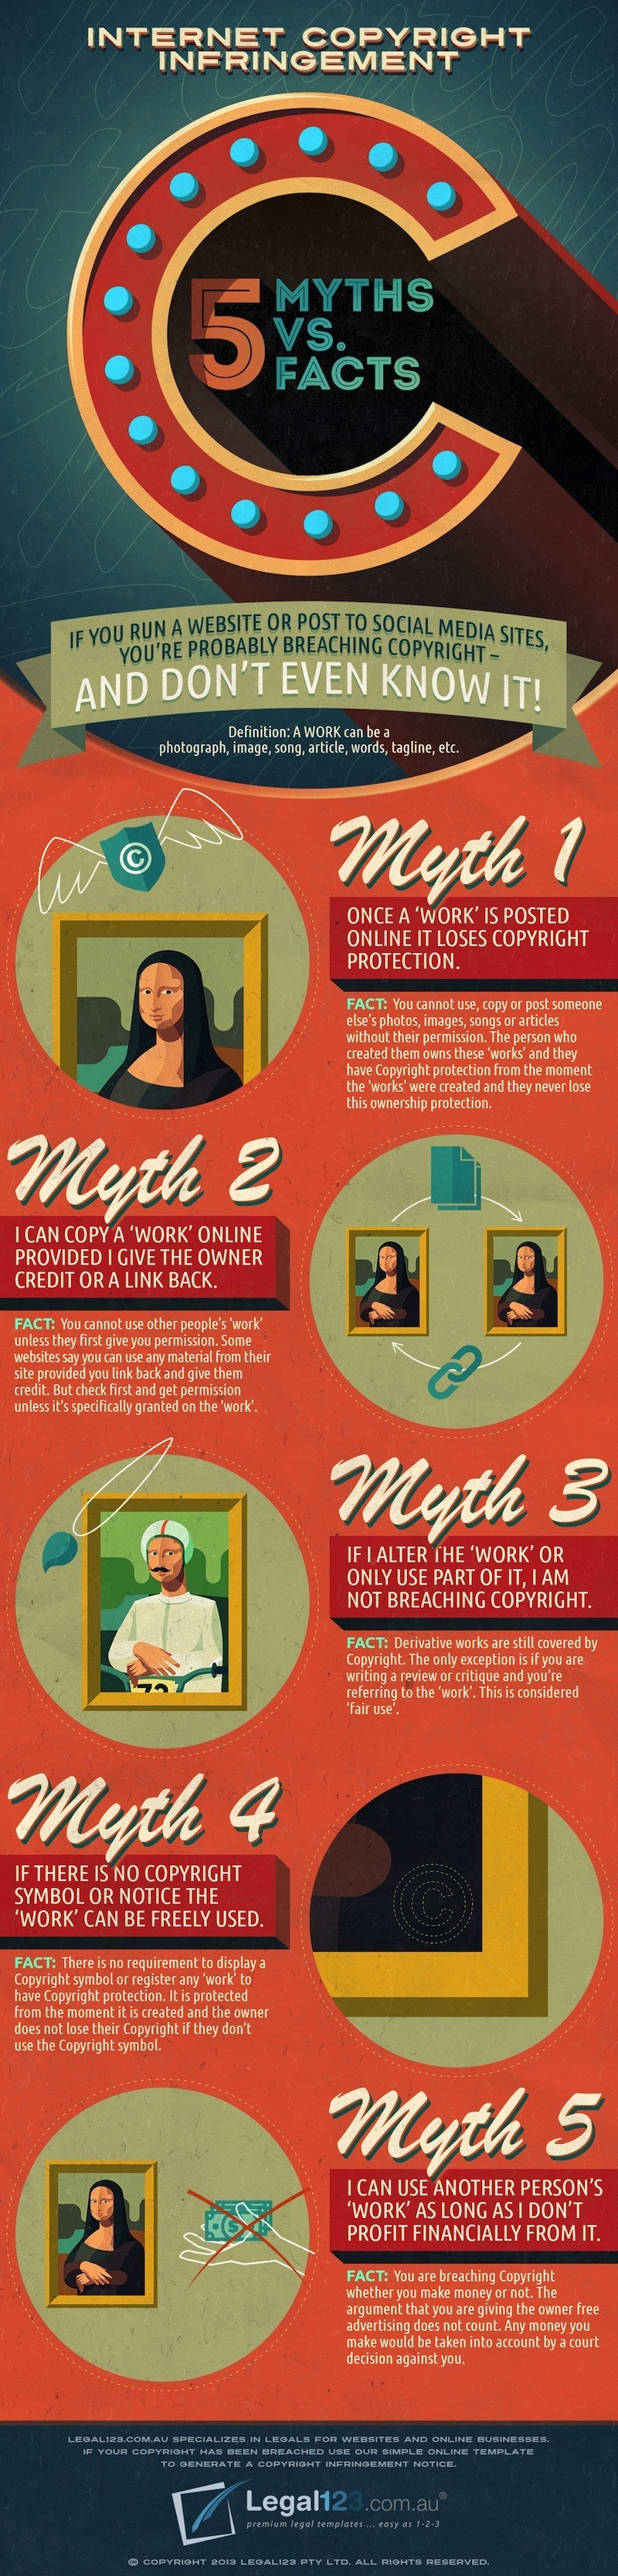 Myths and Facts about Copyright Infringement Infographic